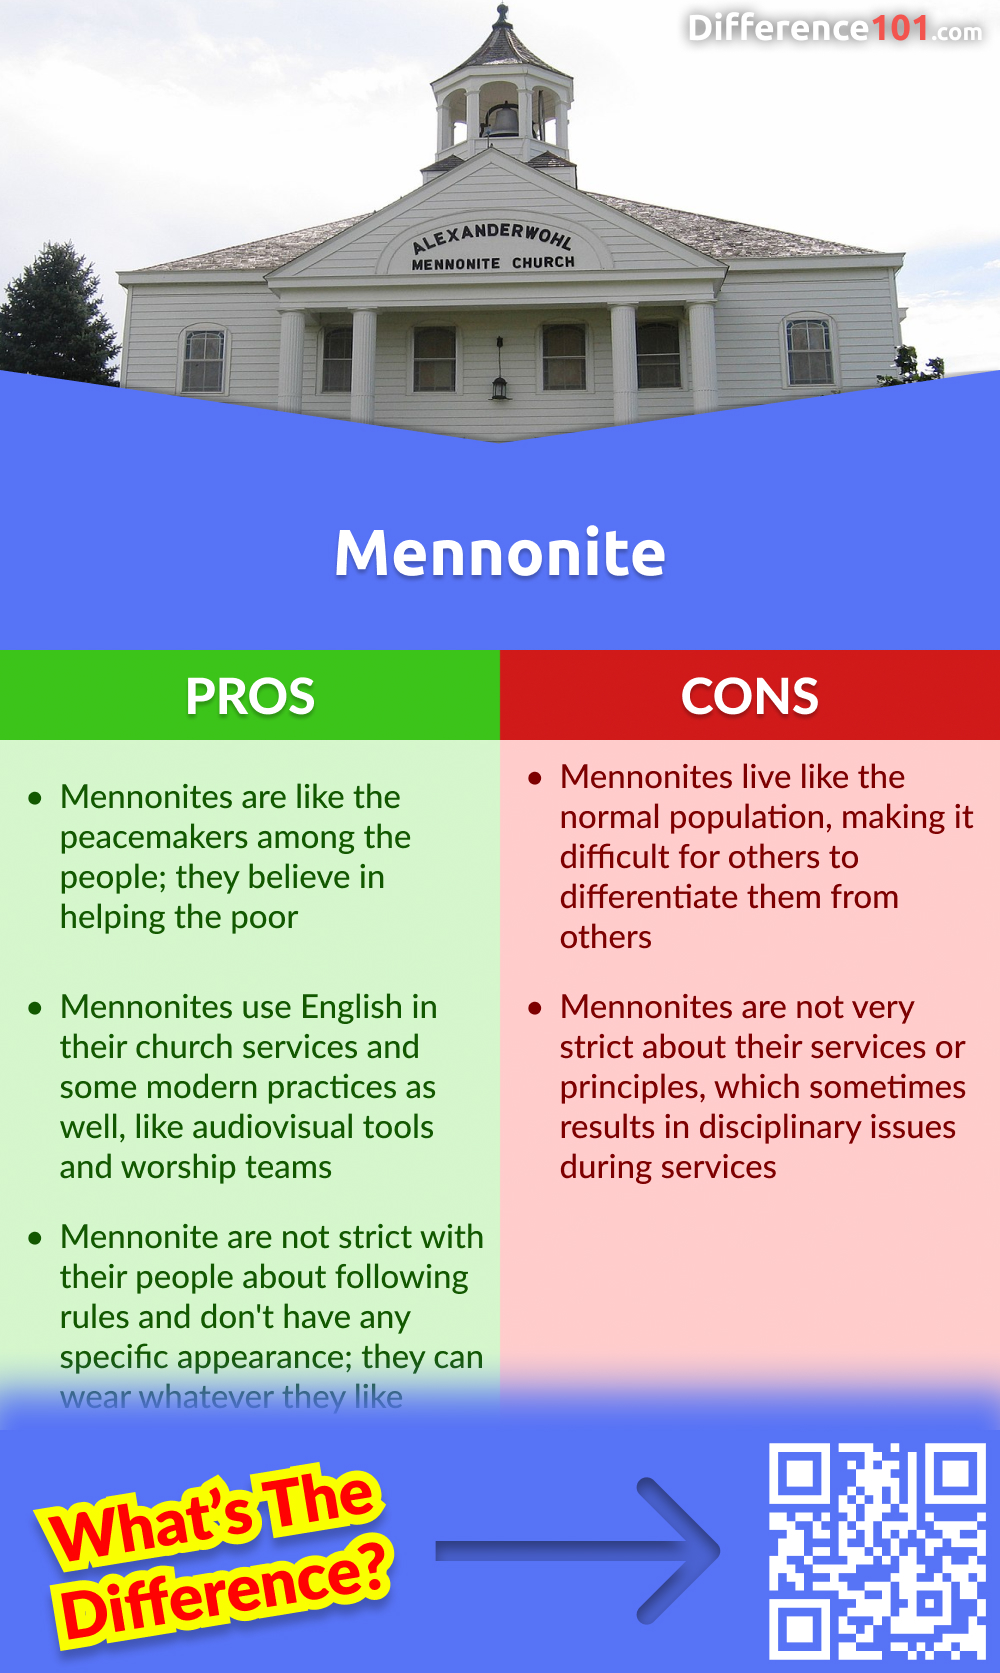 Mennonite Pros and Cons